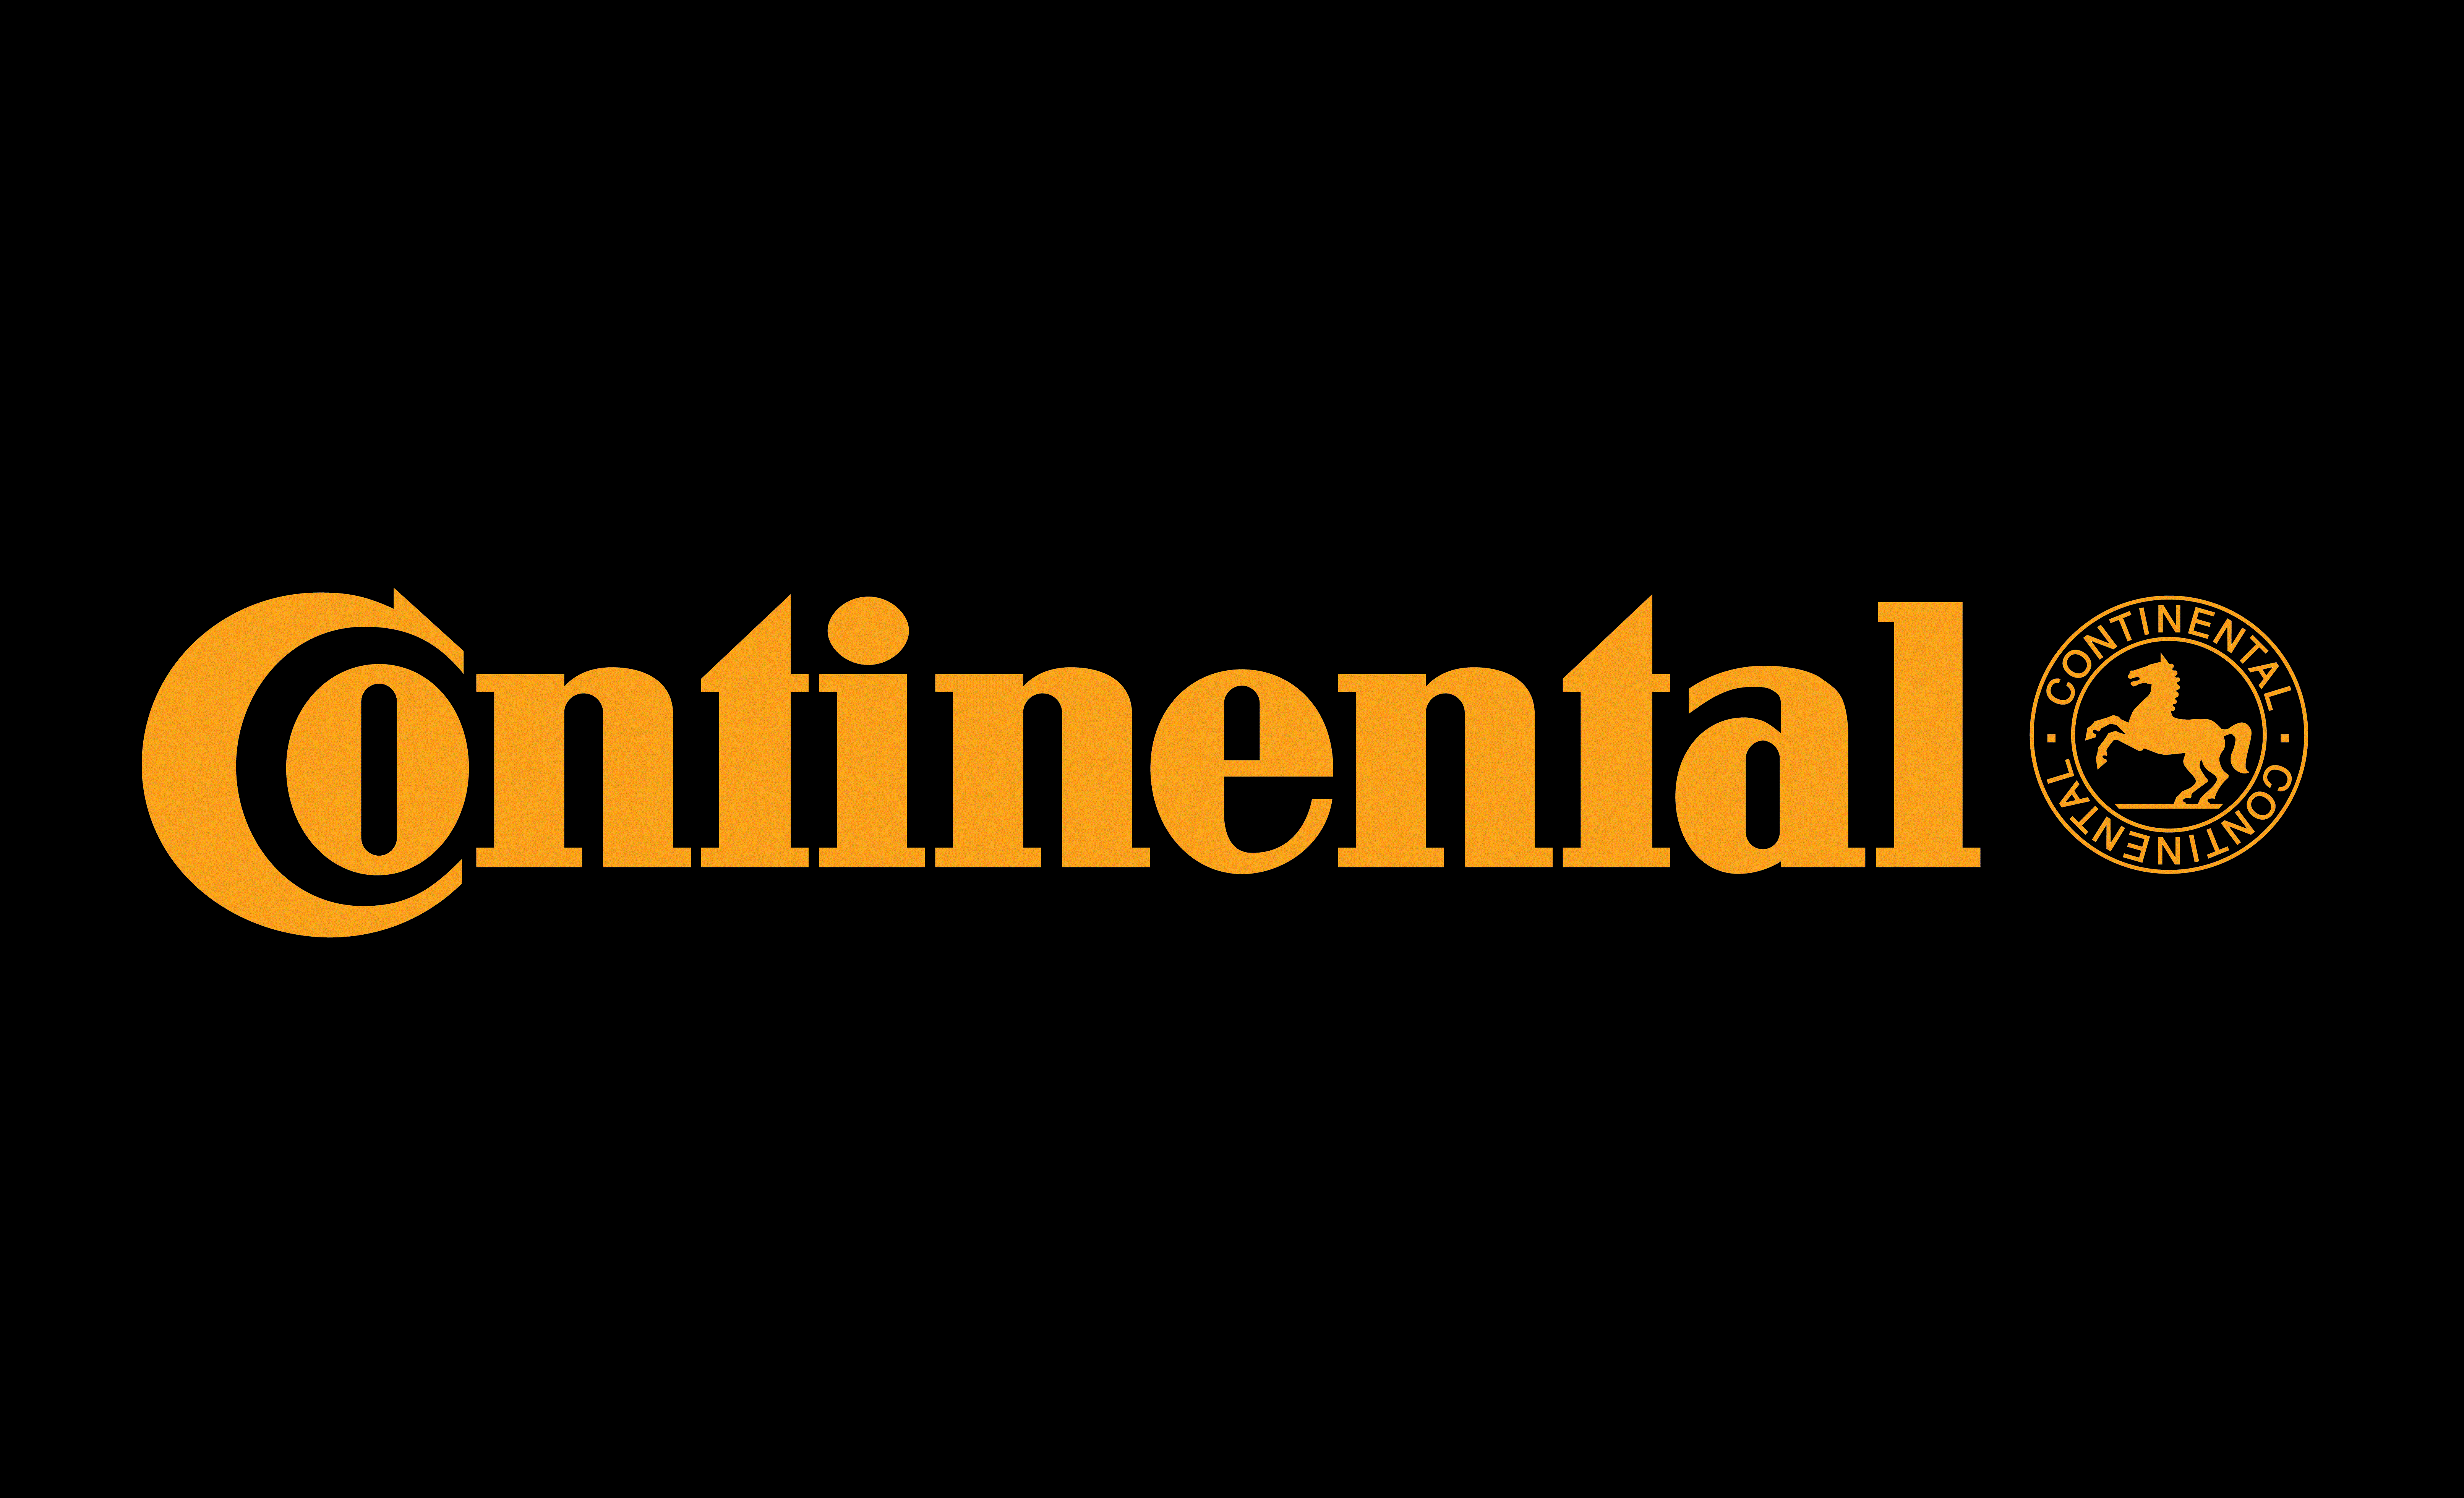 Continental reduces fuel consumption in commercial vehicles by as much